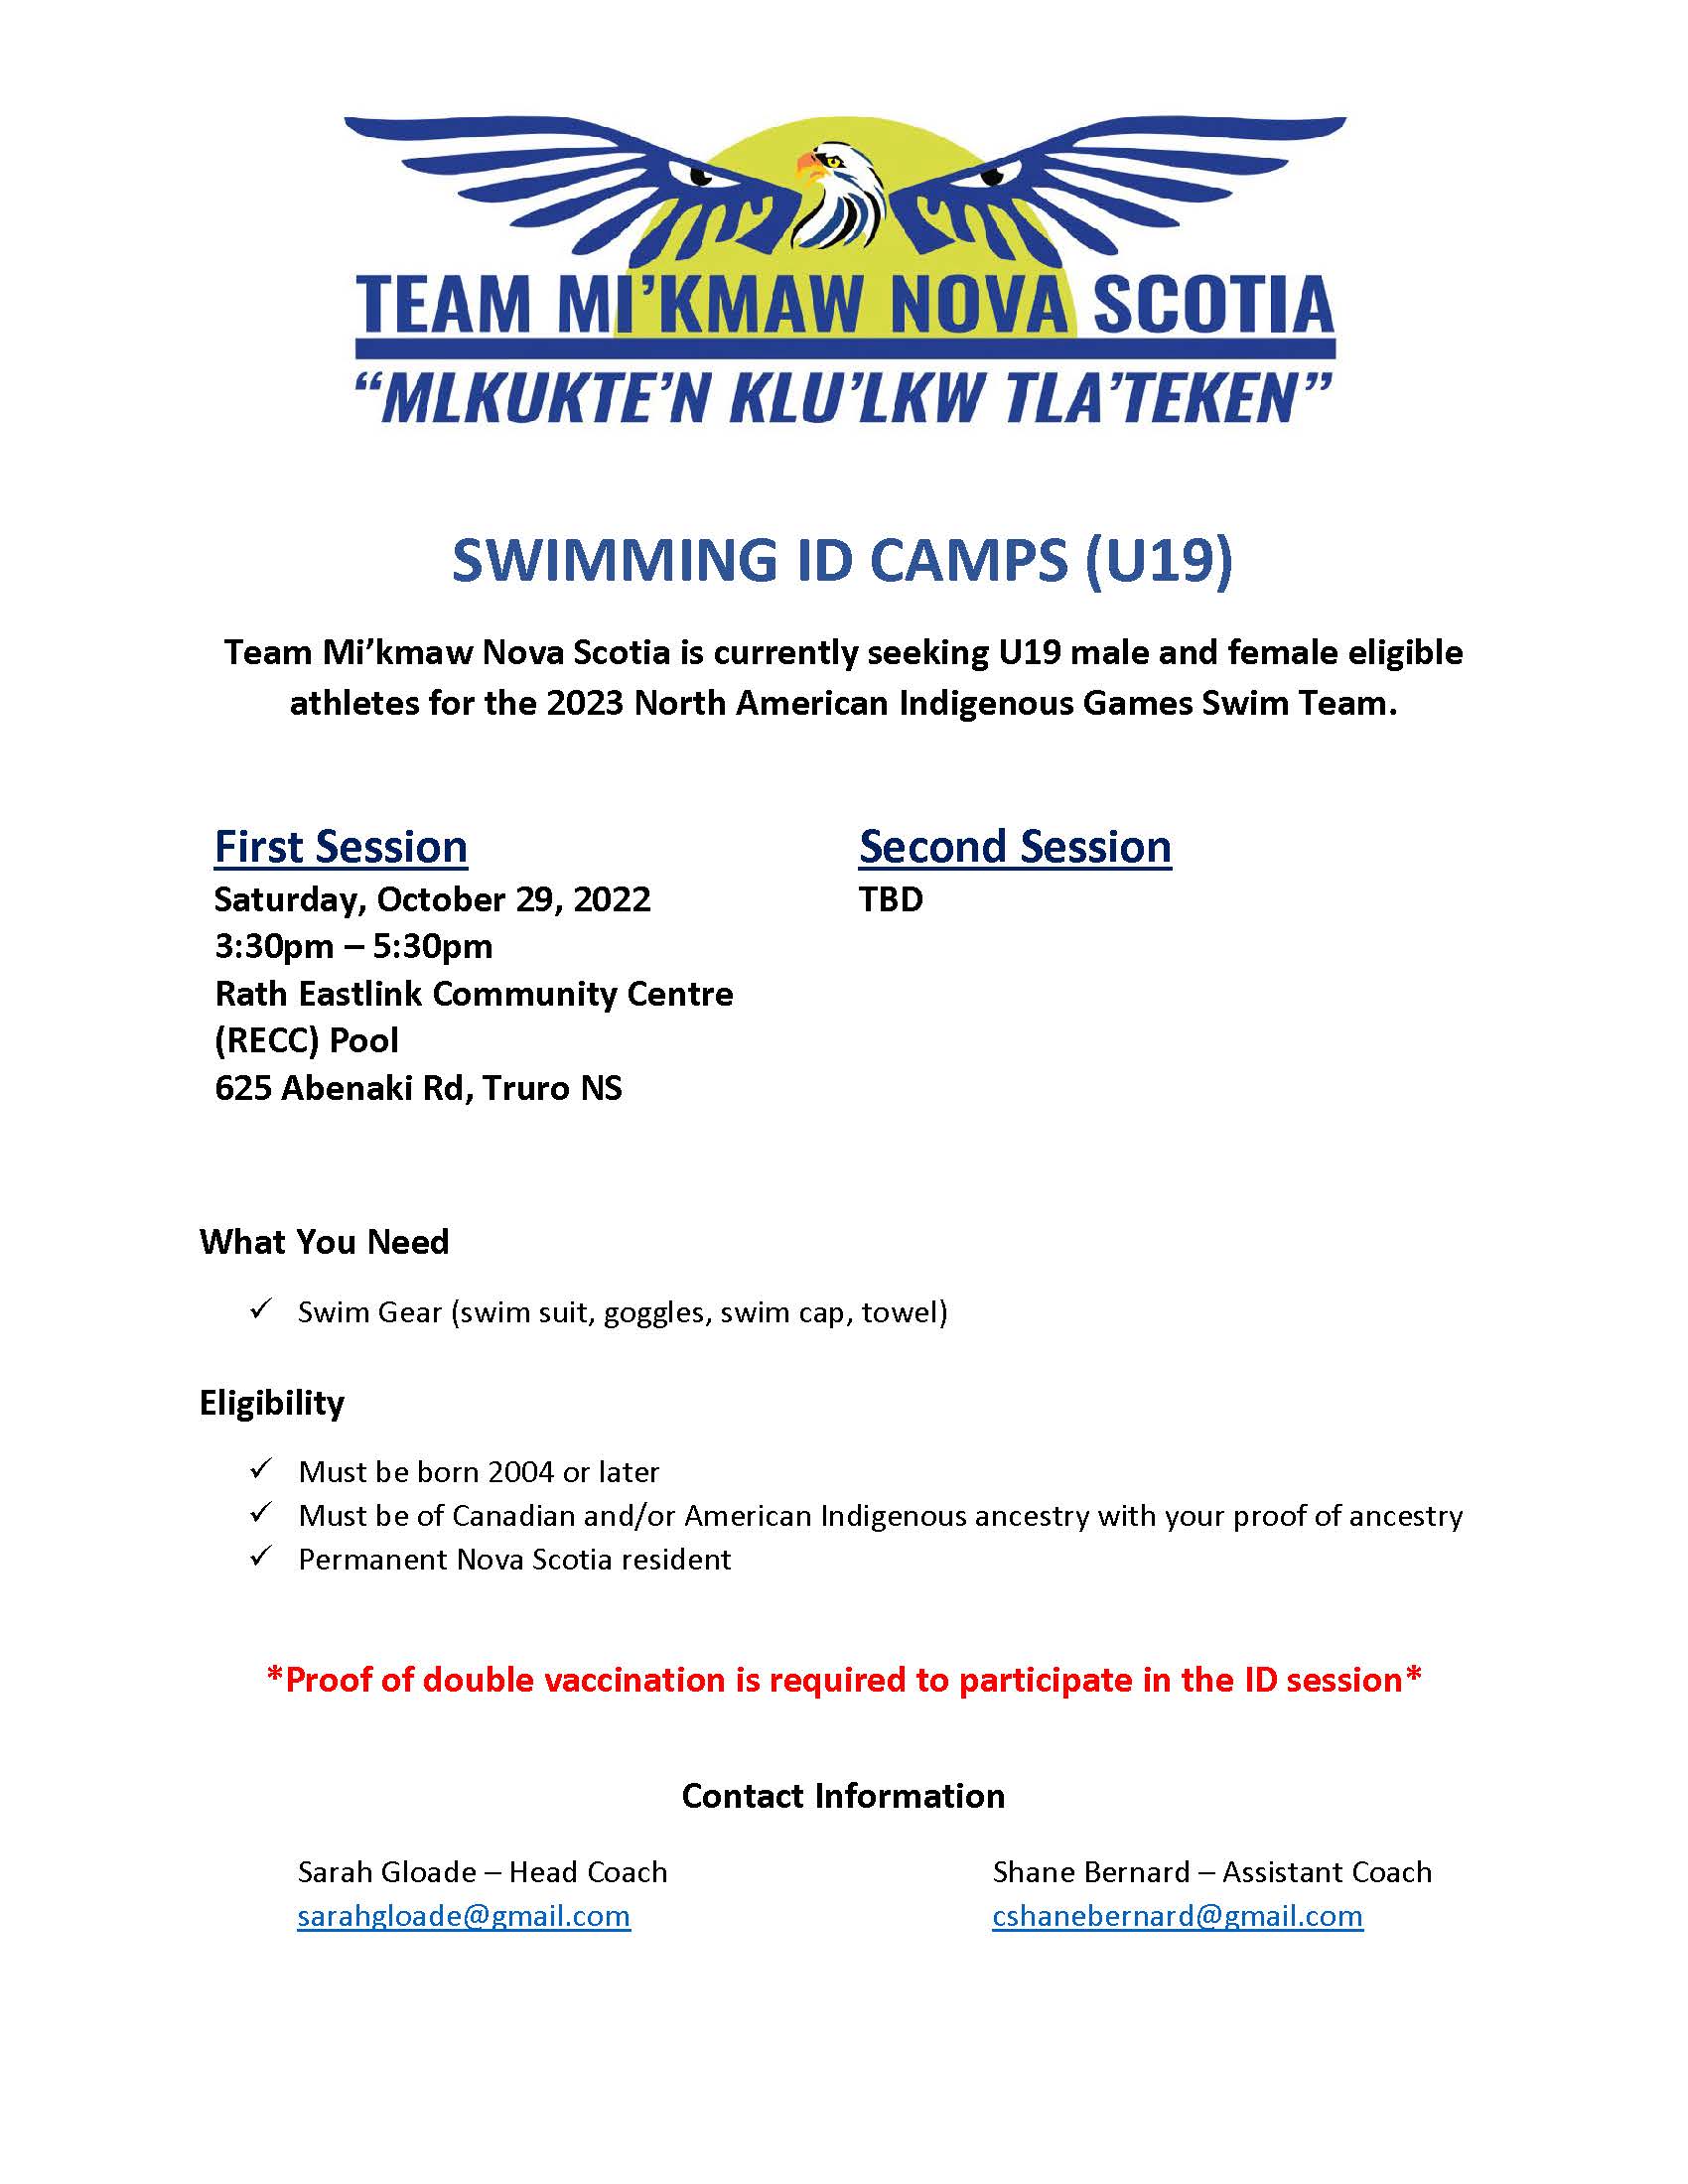 Swimming ID Camps - Oct